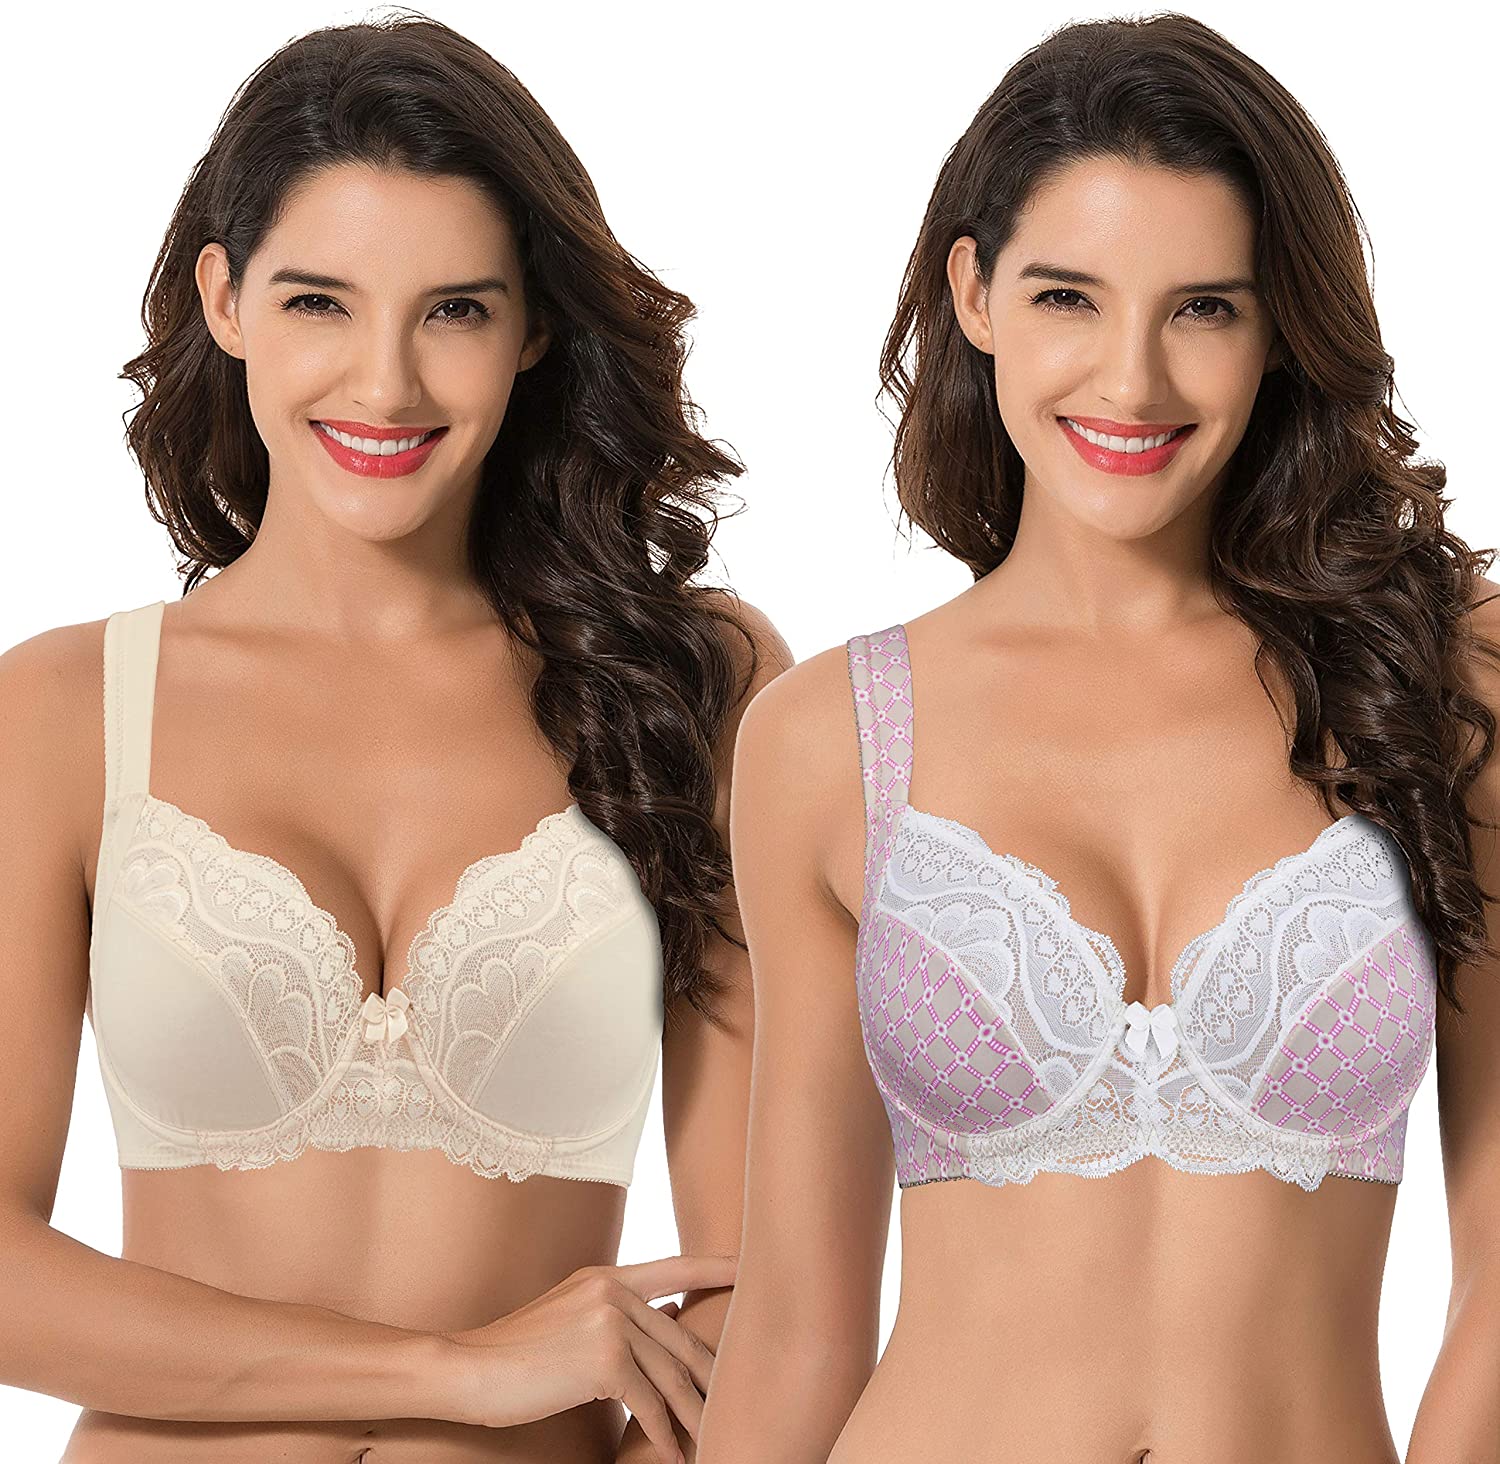 Curve Muse Women's Plus Size Add 1 and a half Cup Push Up Underwire Lace  Bras -2PK-Black,Cream-34D 